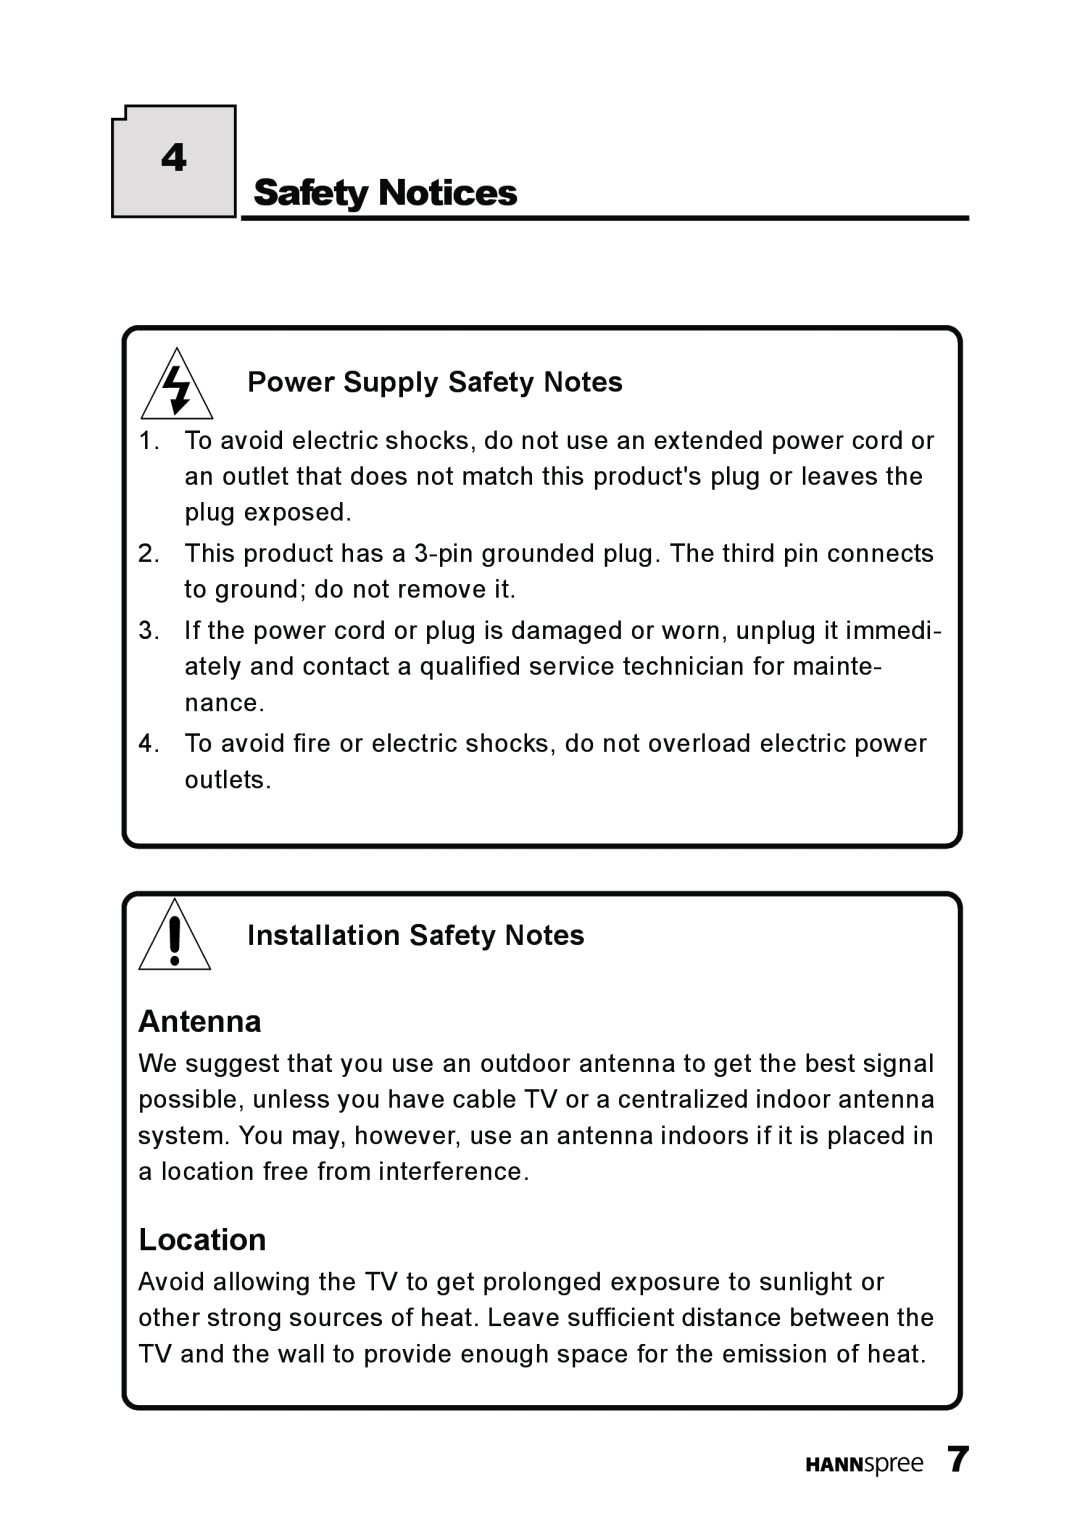 HANNspree LT11-23A1 user manual Safety Notices, Antenna, Location, Power Supply Safety Notes, Installation Safety Notes 